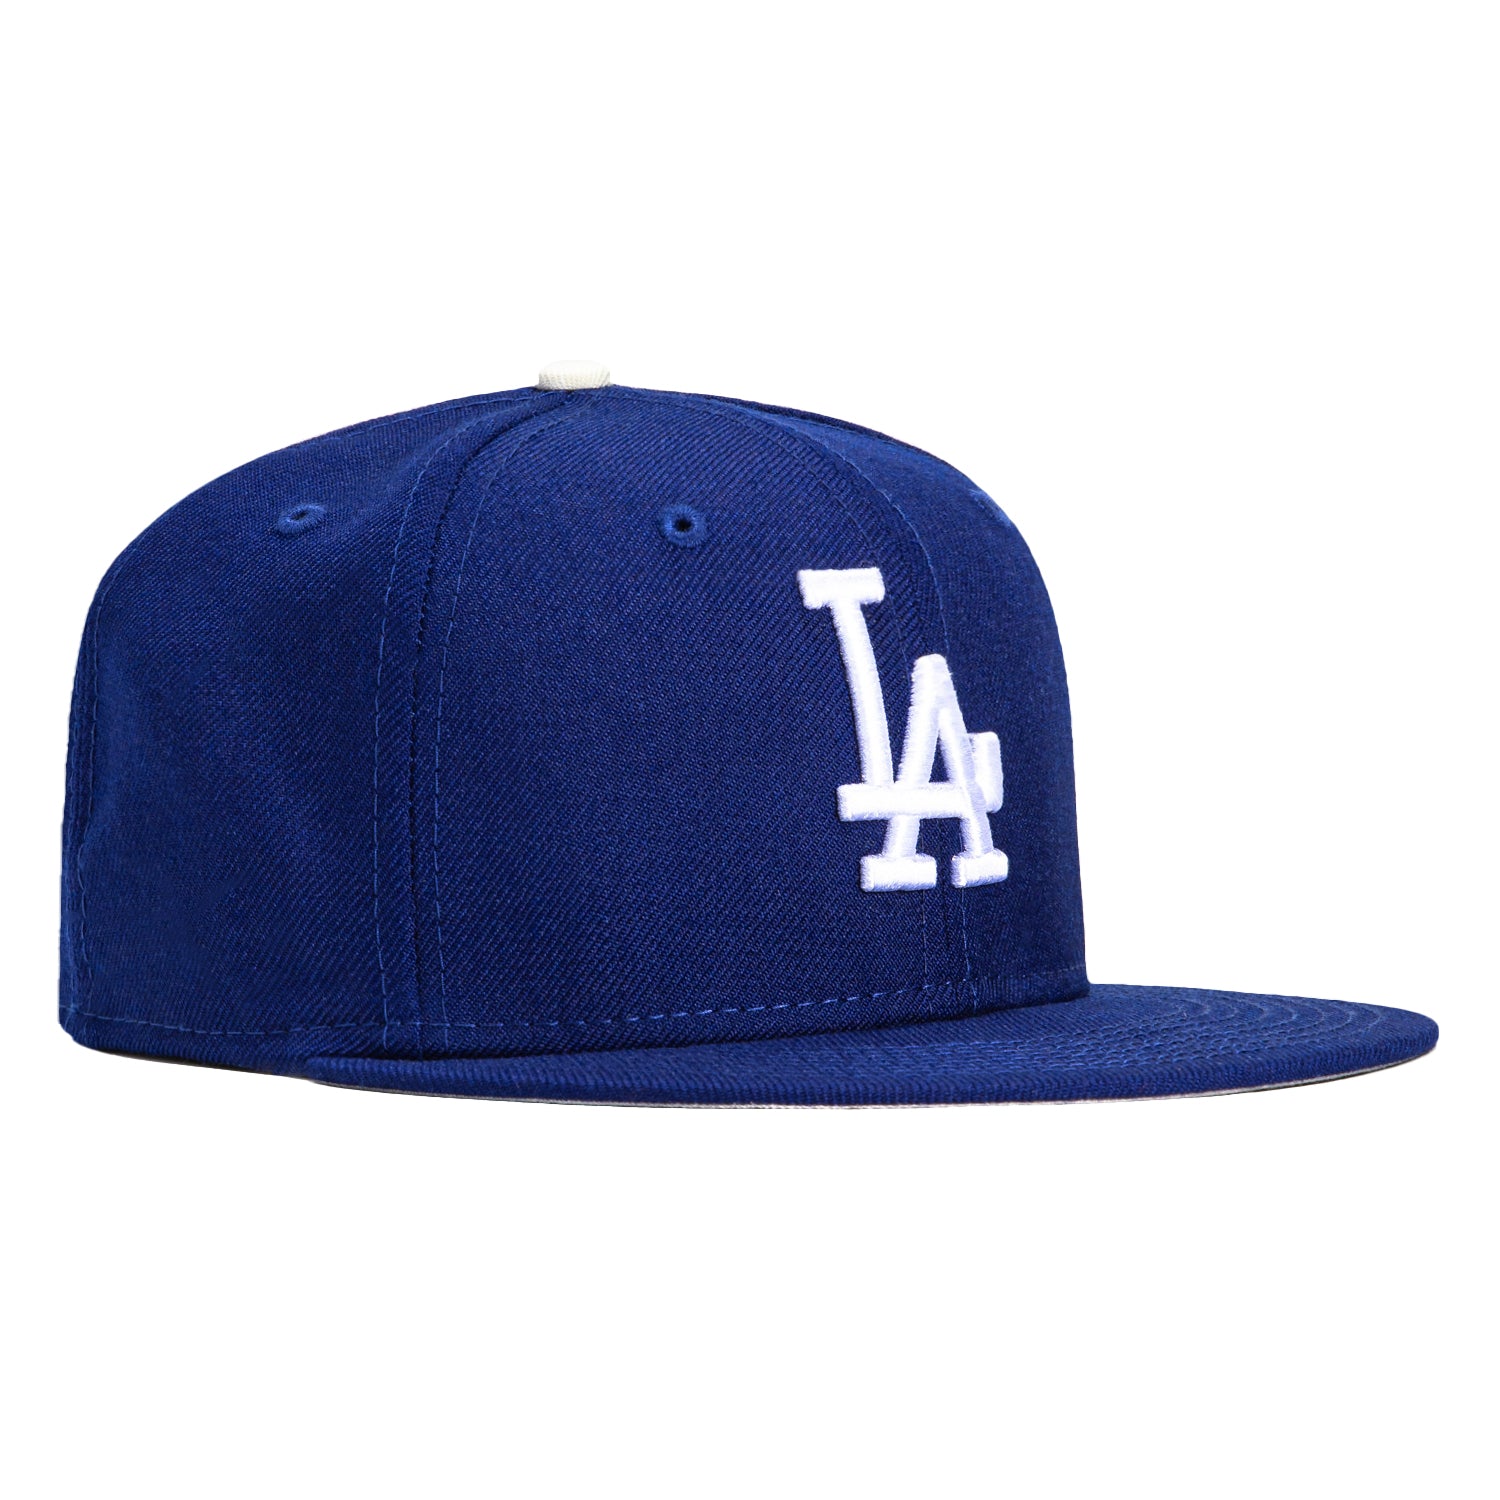  New Era 59Fifty Los Angeles Dodgers LA Fitted Hat